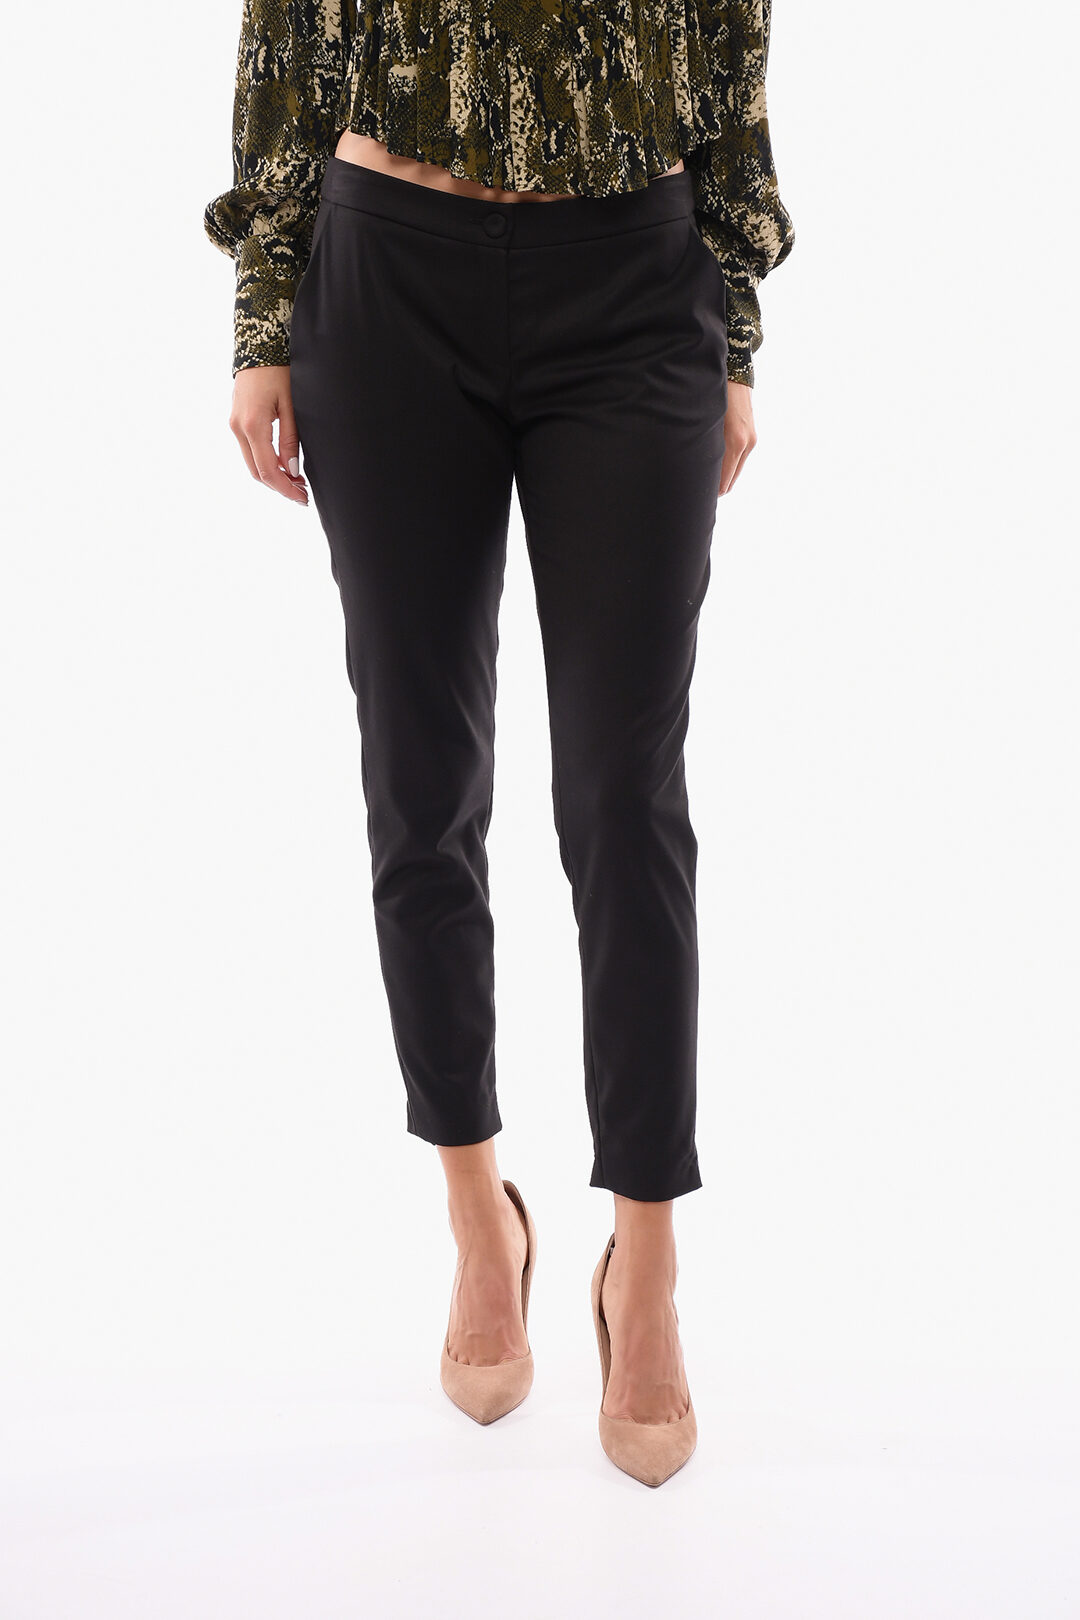 Versace Wool Cigarette Pants with Pleats men - Glamood Outlet